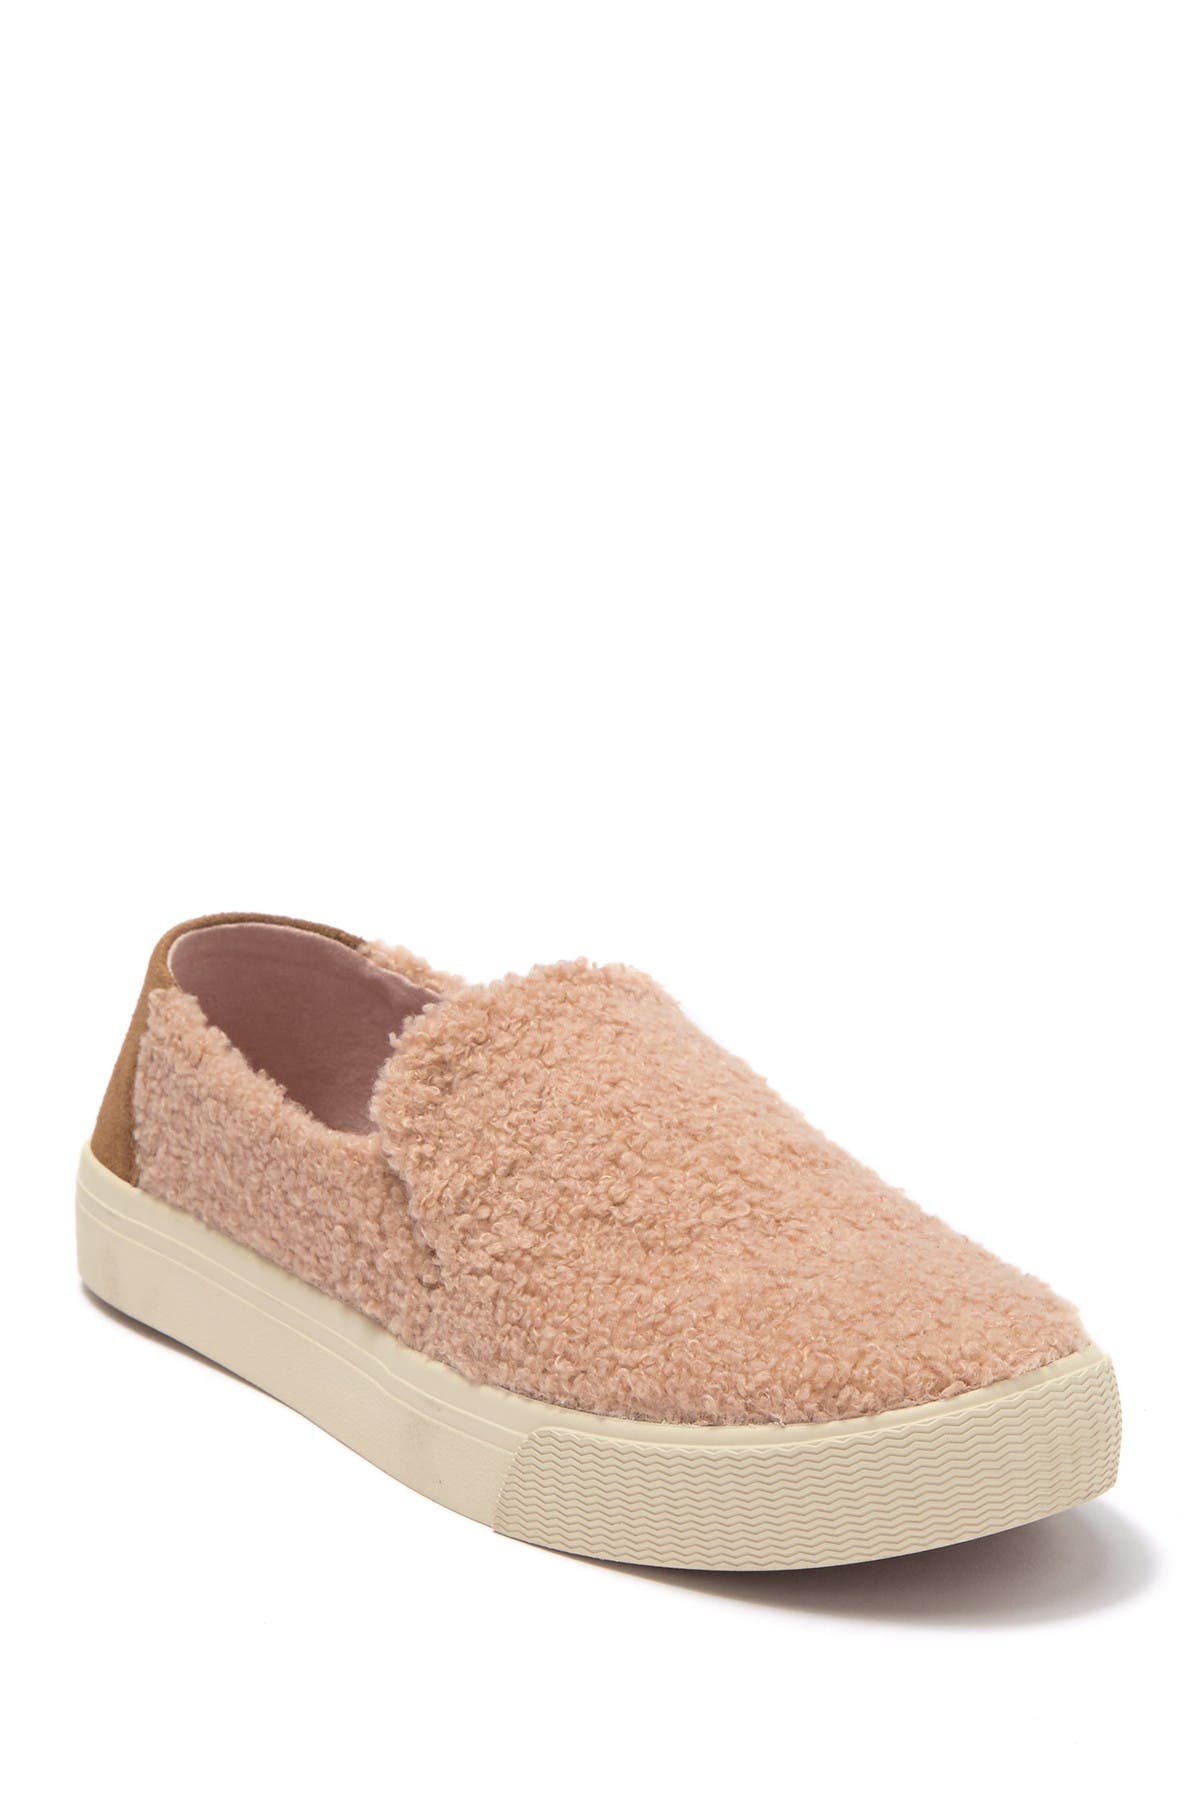 TOMS | Sunset Faux Shearling Slip-On 